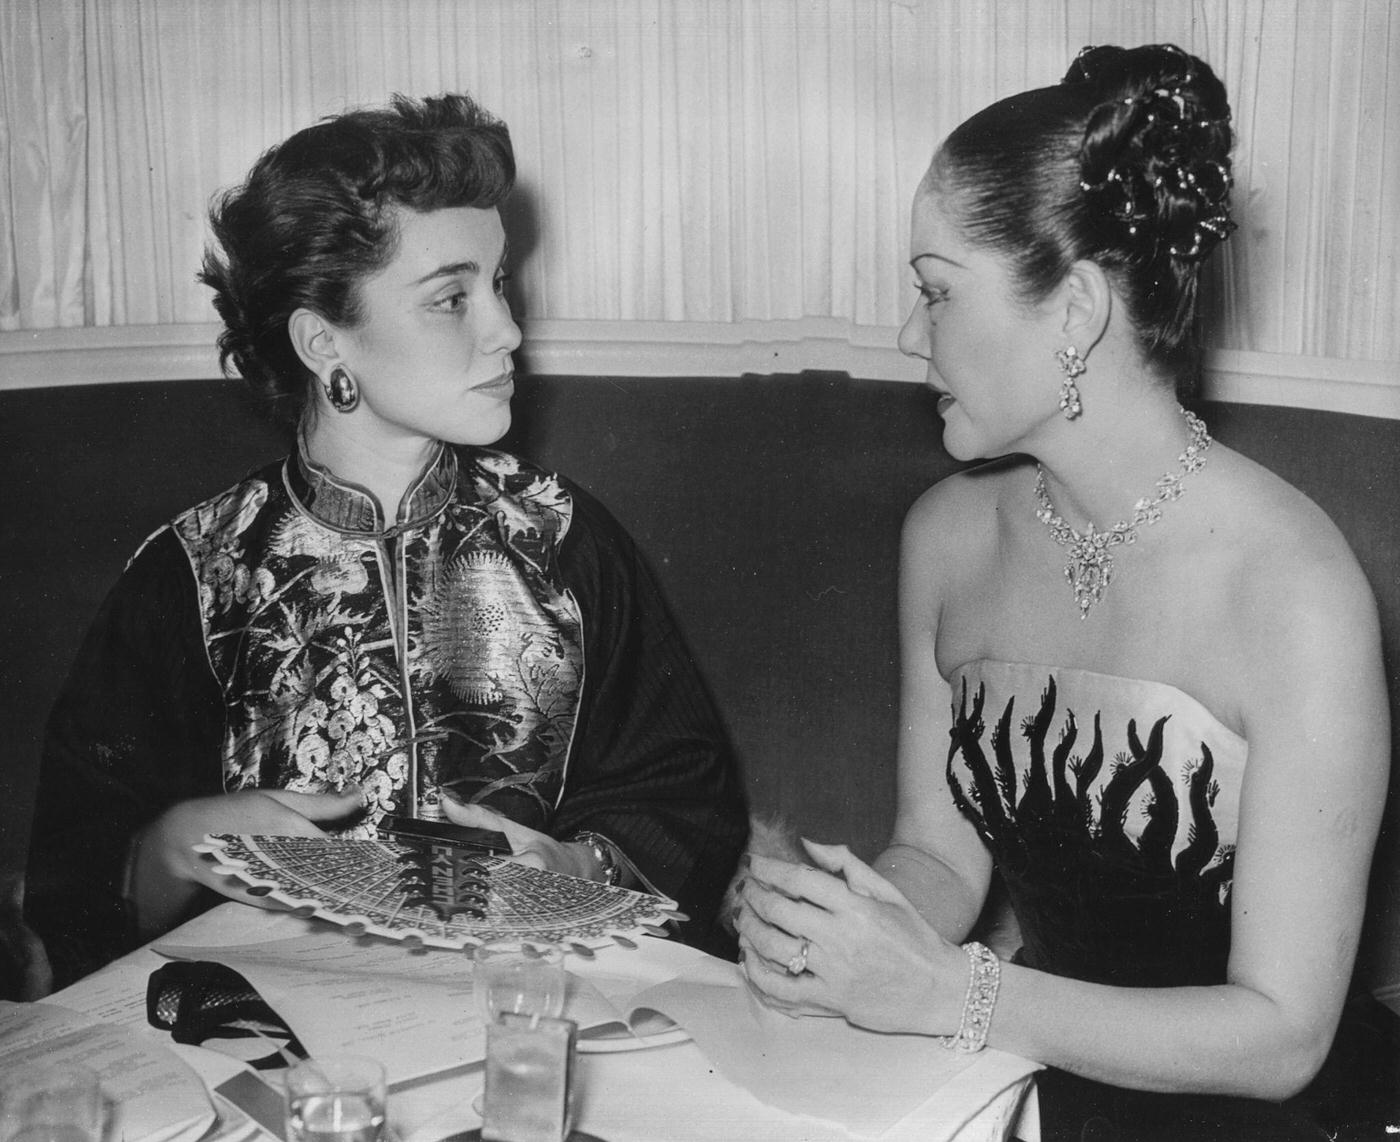 Actress Linda Christian (left) wearing a traditional Chinese jacket and talking to Chinese-born compere Seignon at a Christmas Party held by Chen Yu nail lacquers at the Embassy Club in London, October 28th 1950.